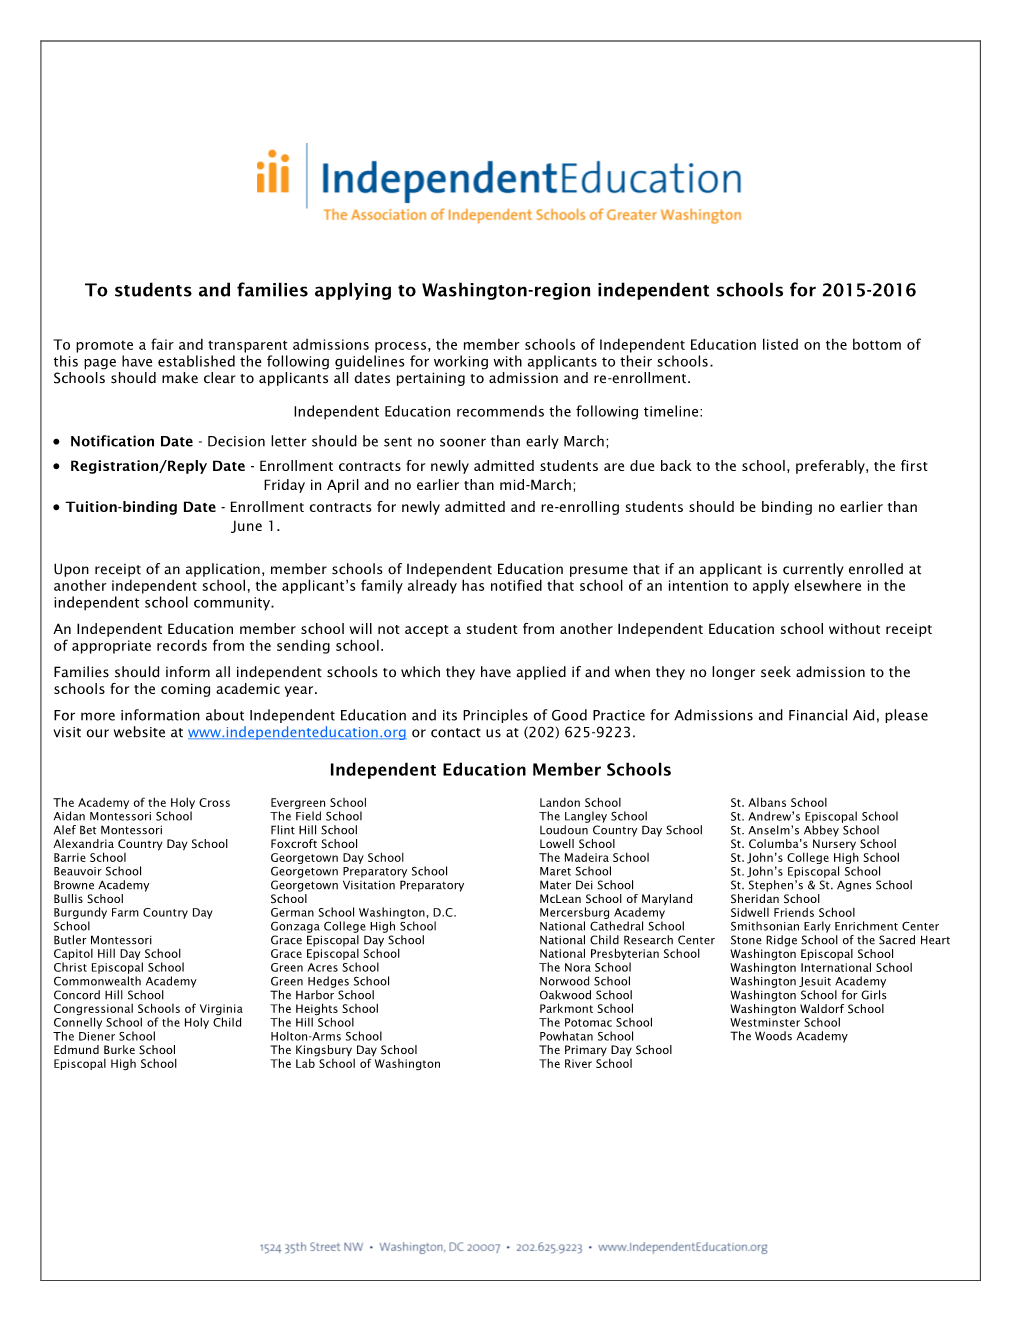 To Students and Families Applying to Washington-Region Independent Schools for 2015-2016